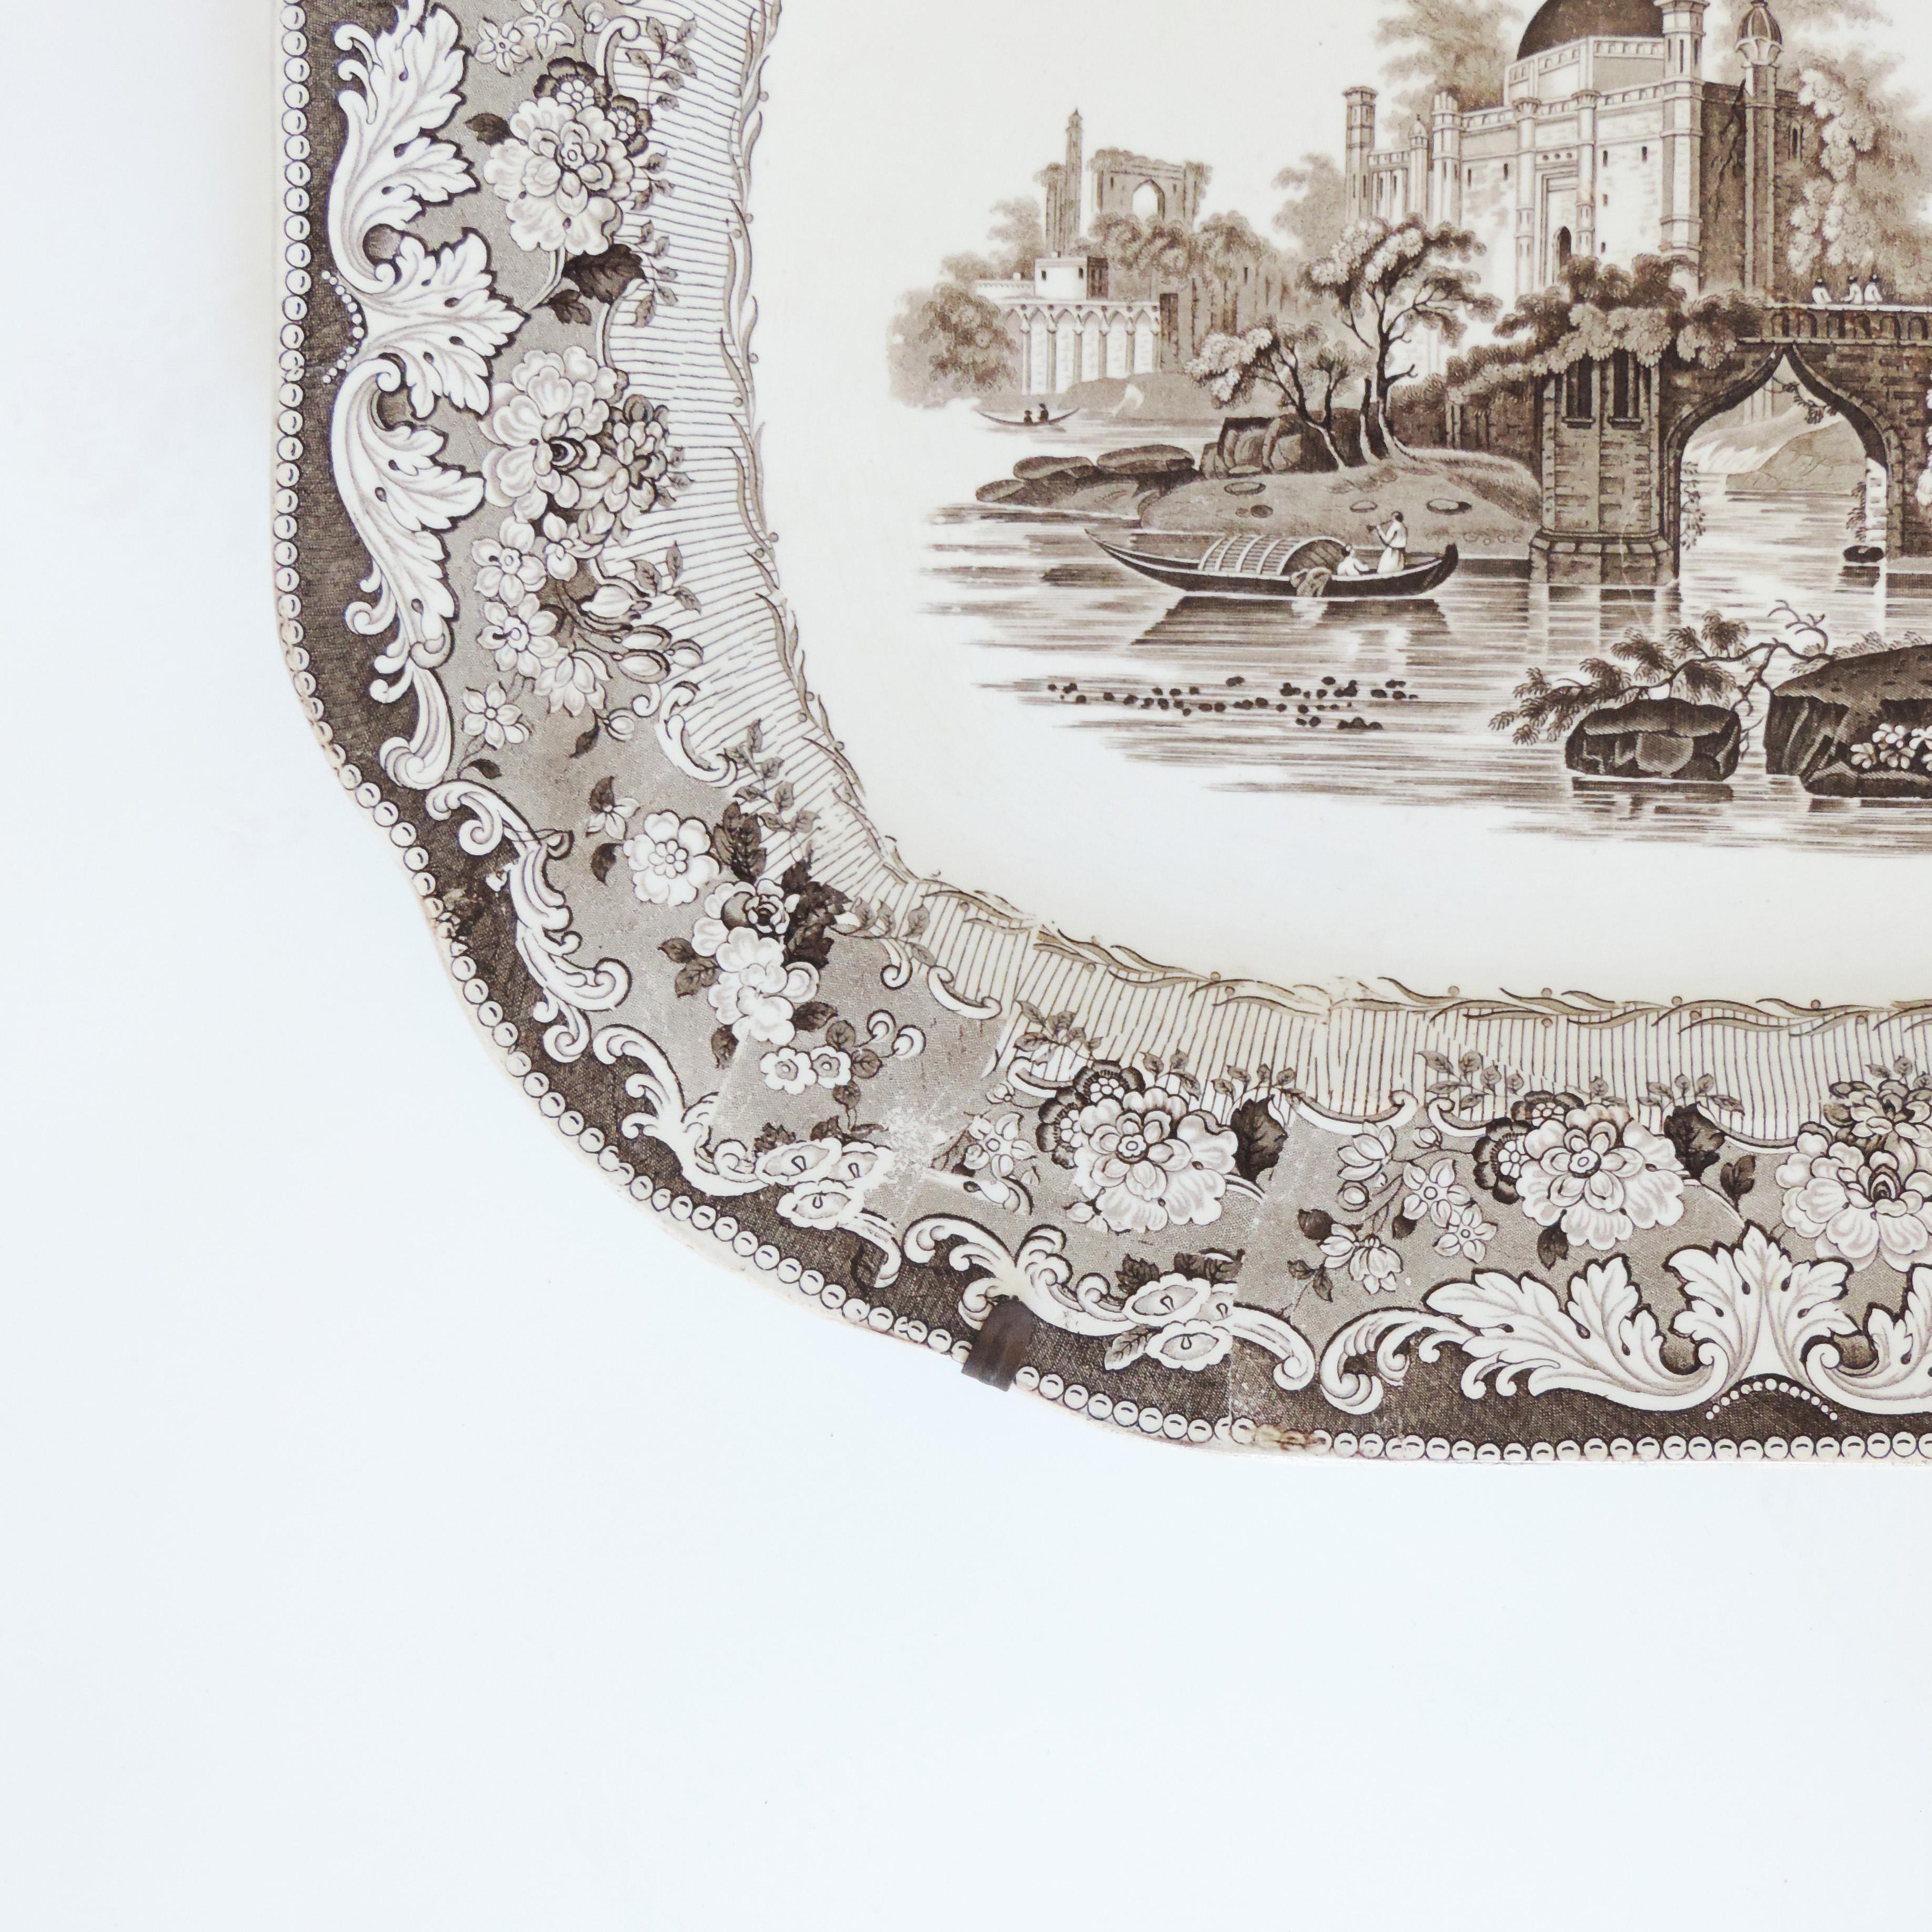 Monumental brown transferware serving plate, England, 1880s
With original hanging wires.